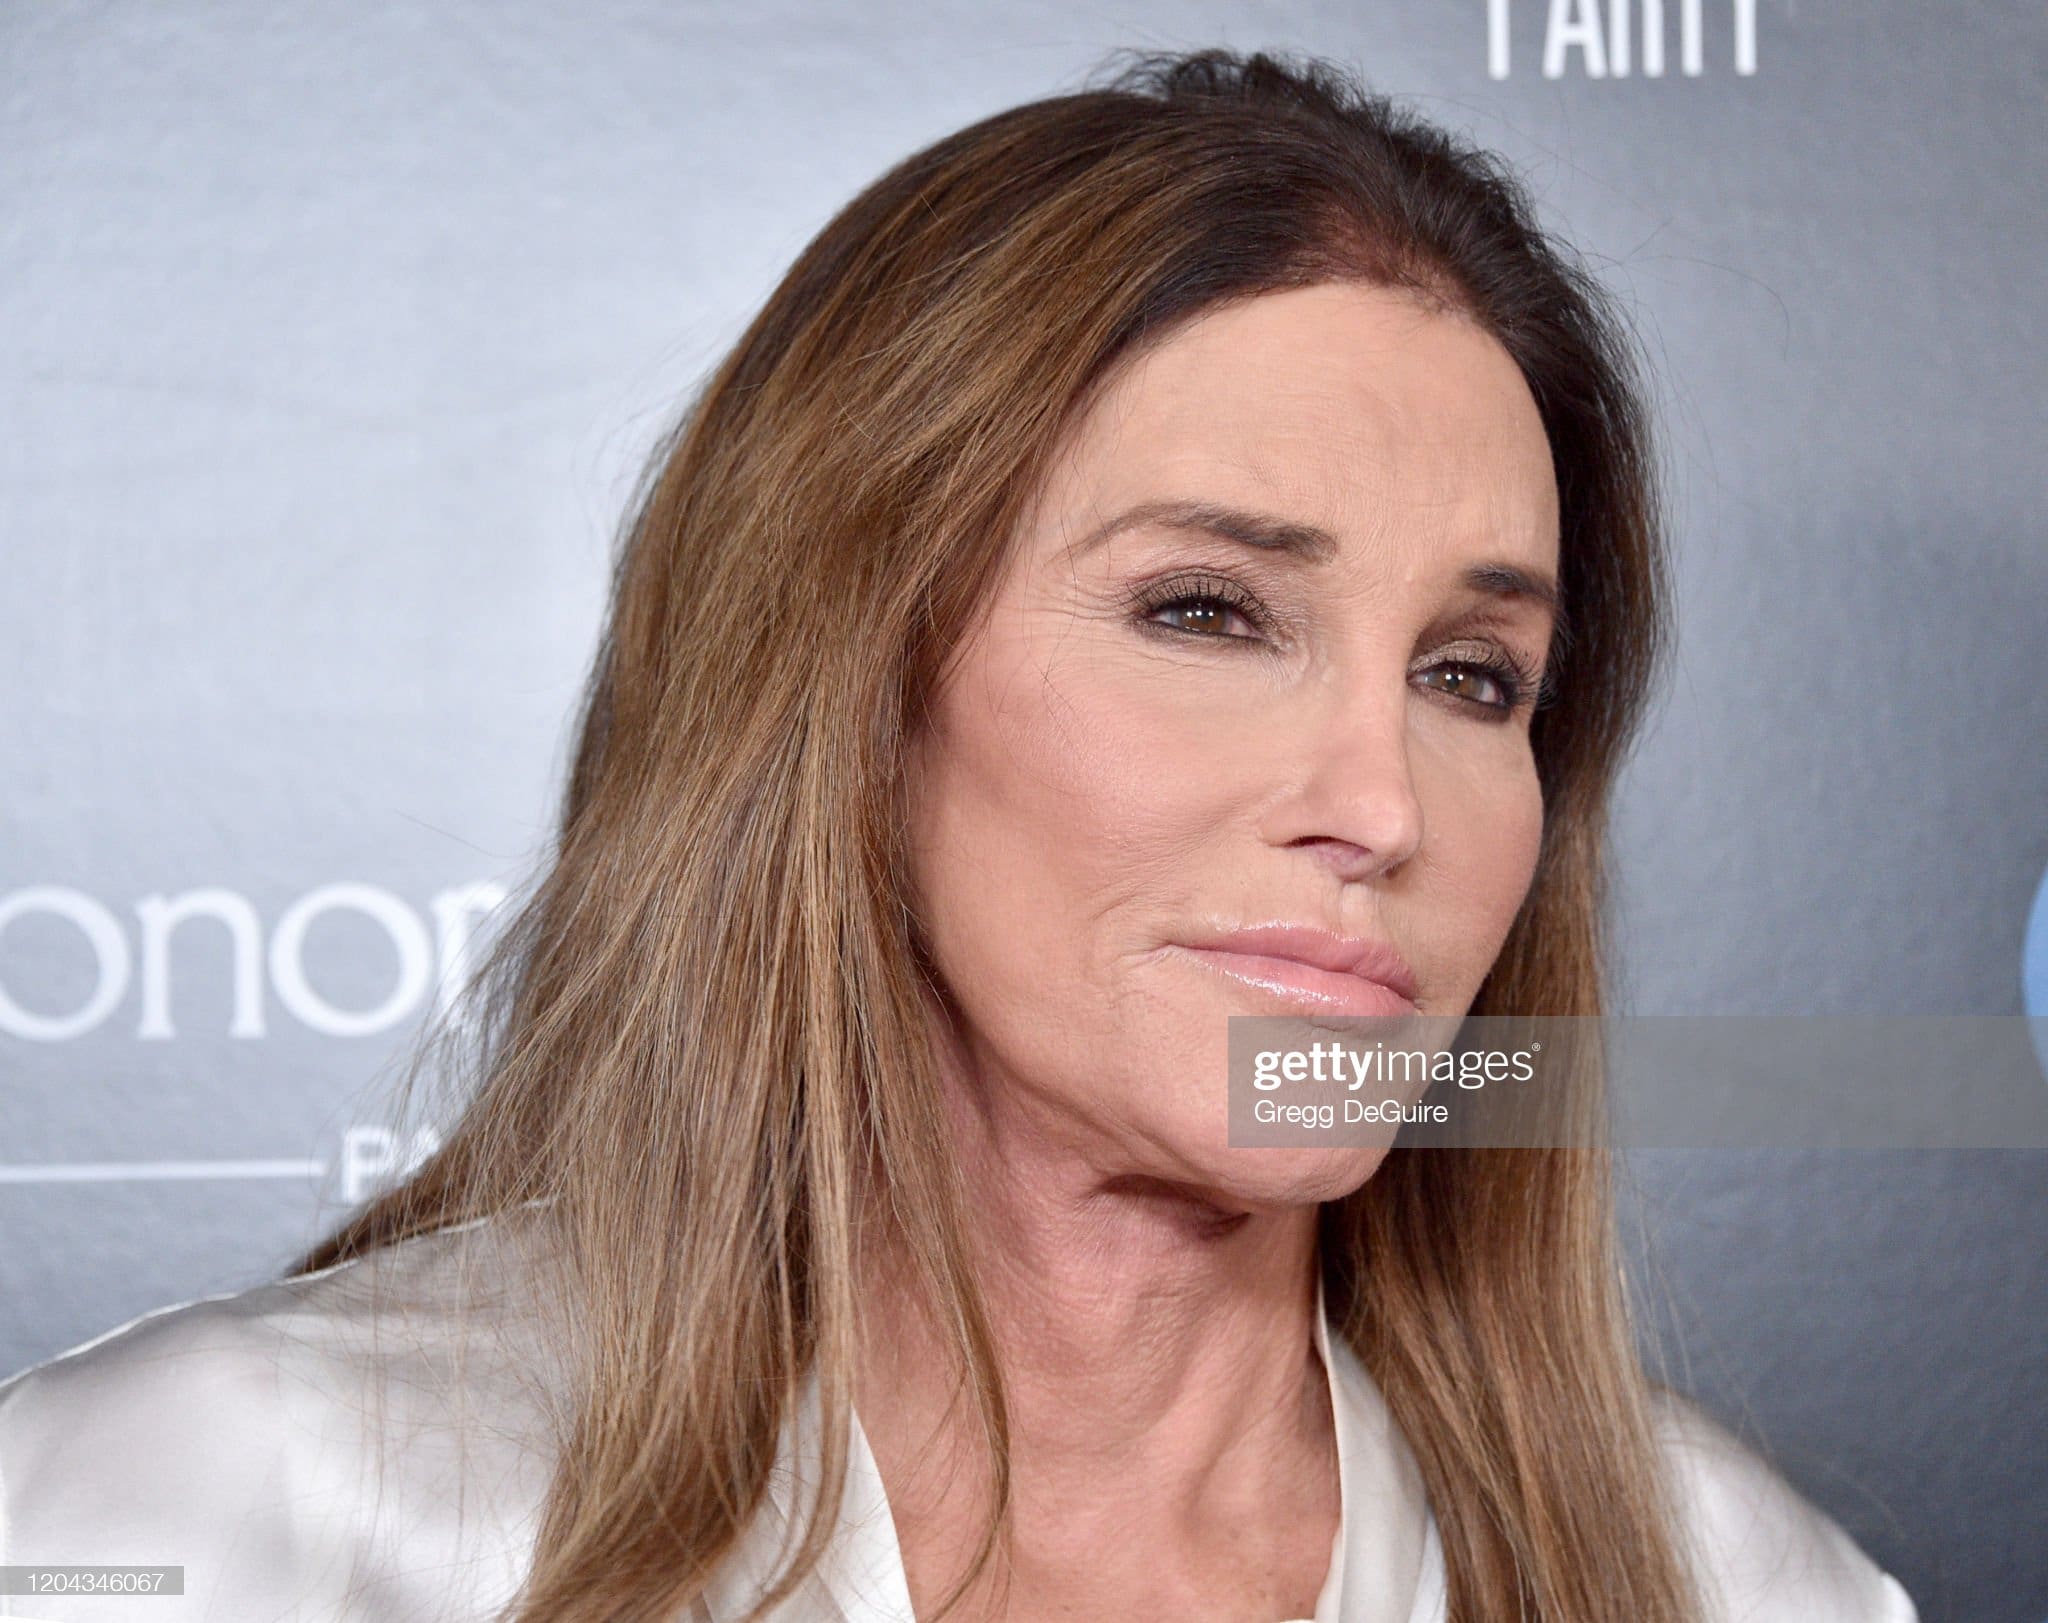 ”caitlyn-jenner-says-people-think-theyre-trans-because-of-publicity”